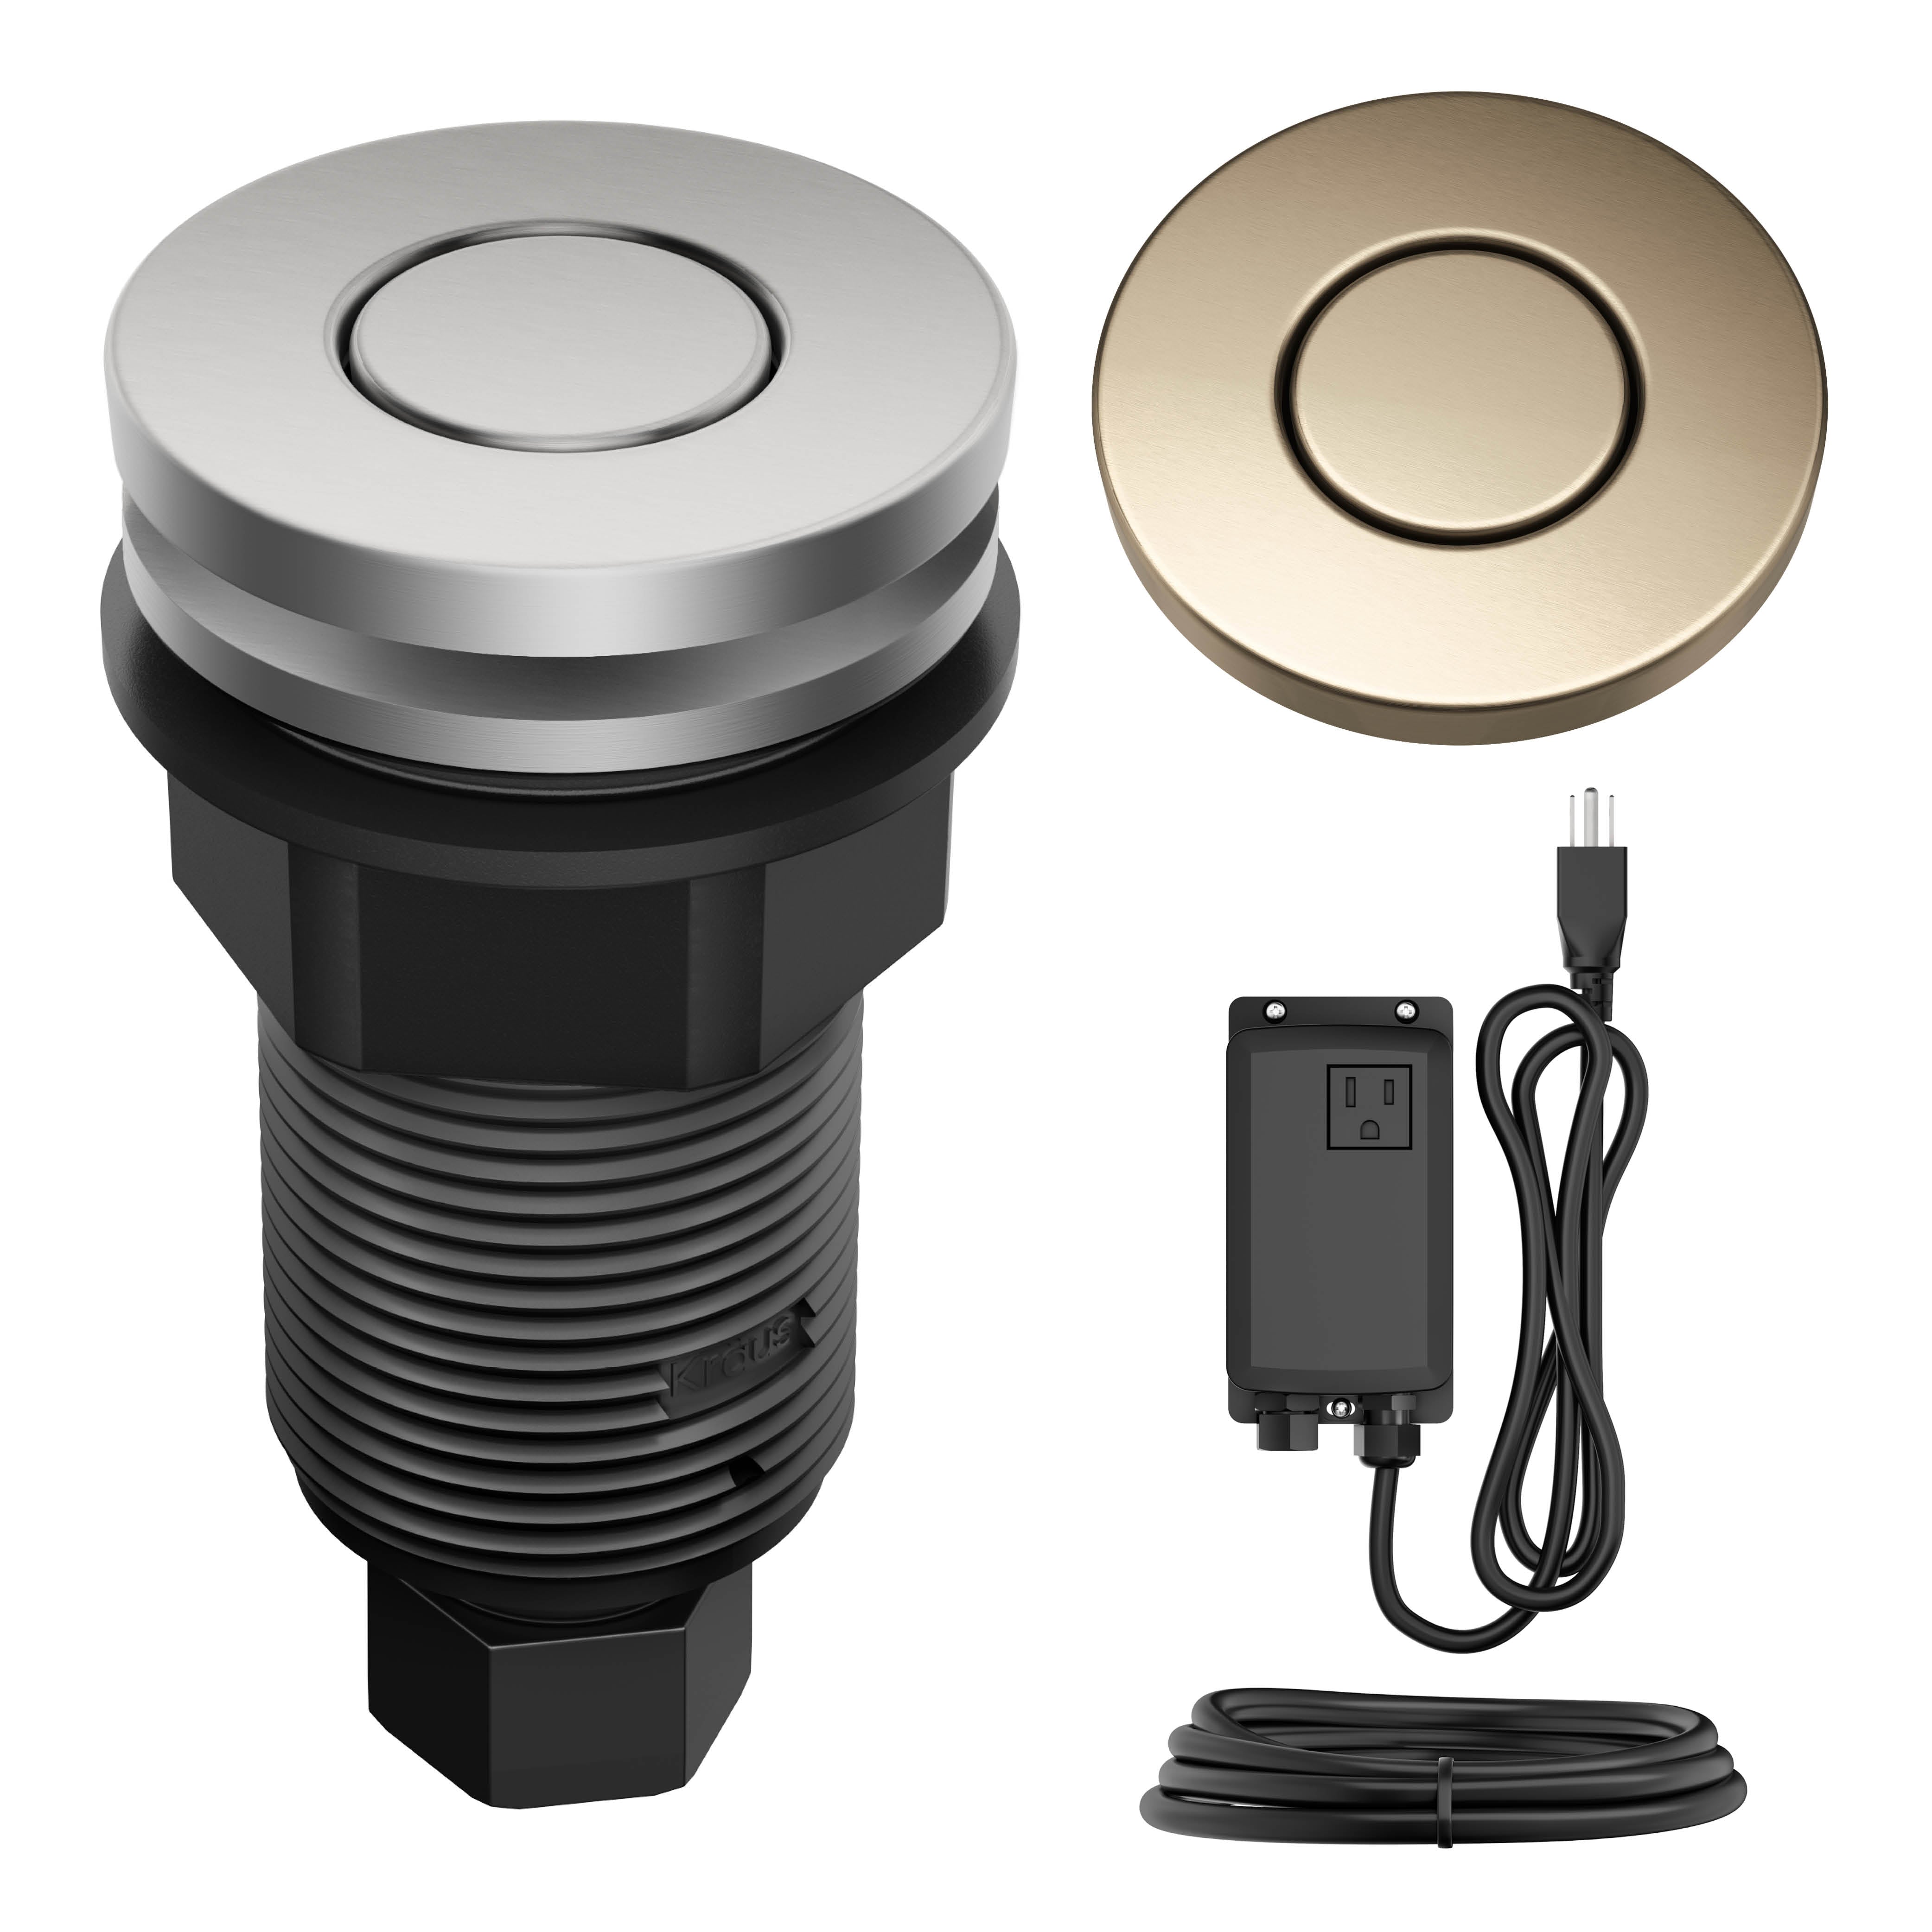 KRAUS Contemporary Flat Top Button Garbage Disposal Air Switch Kit in Antique Champagne Bronze